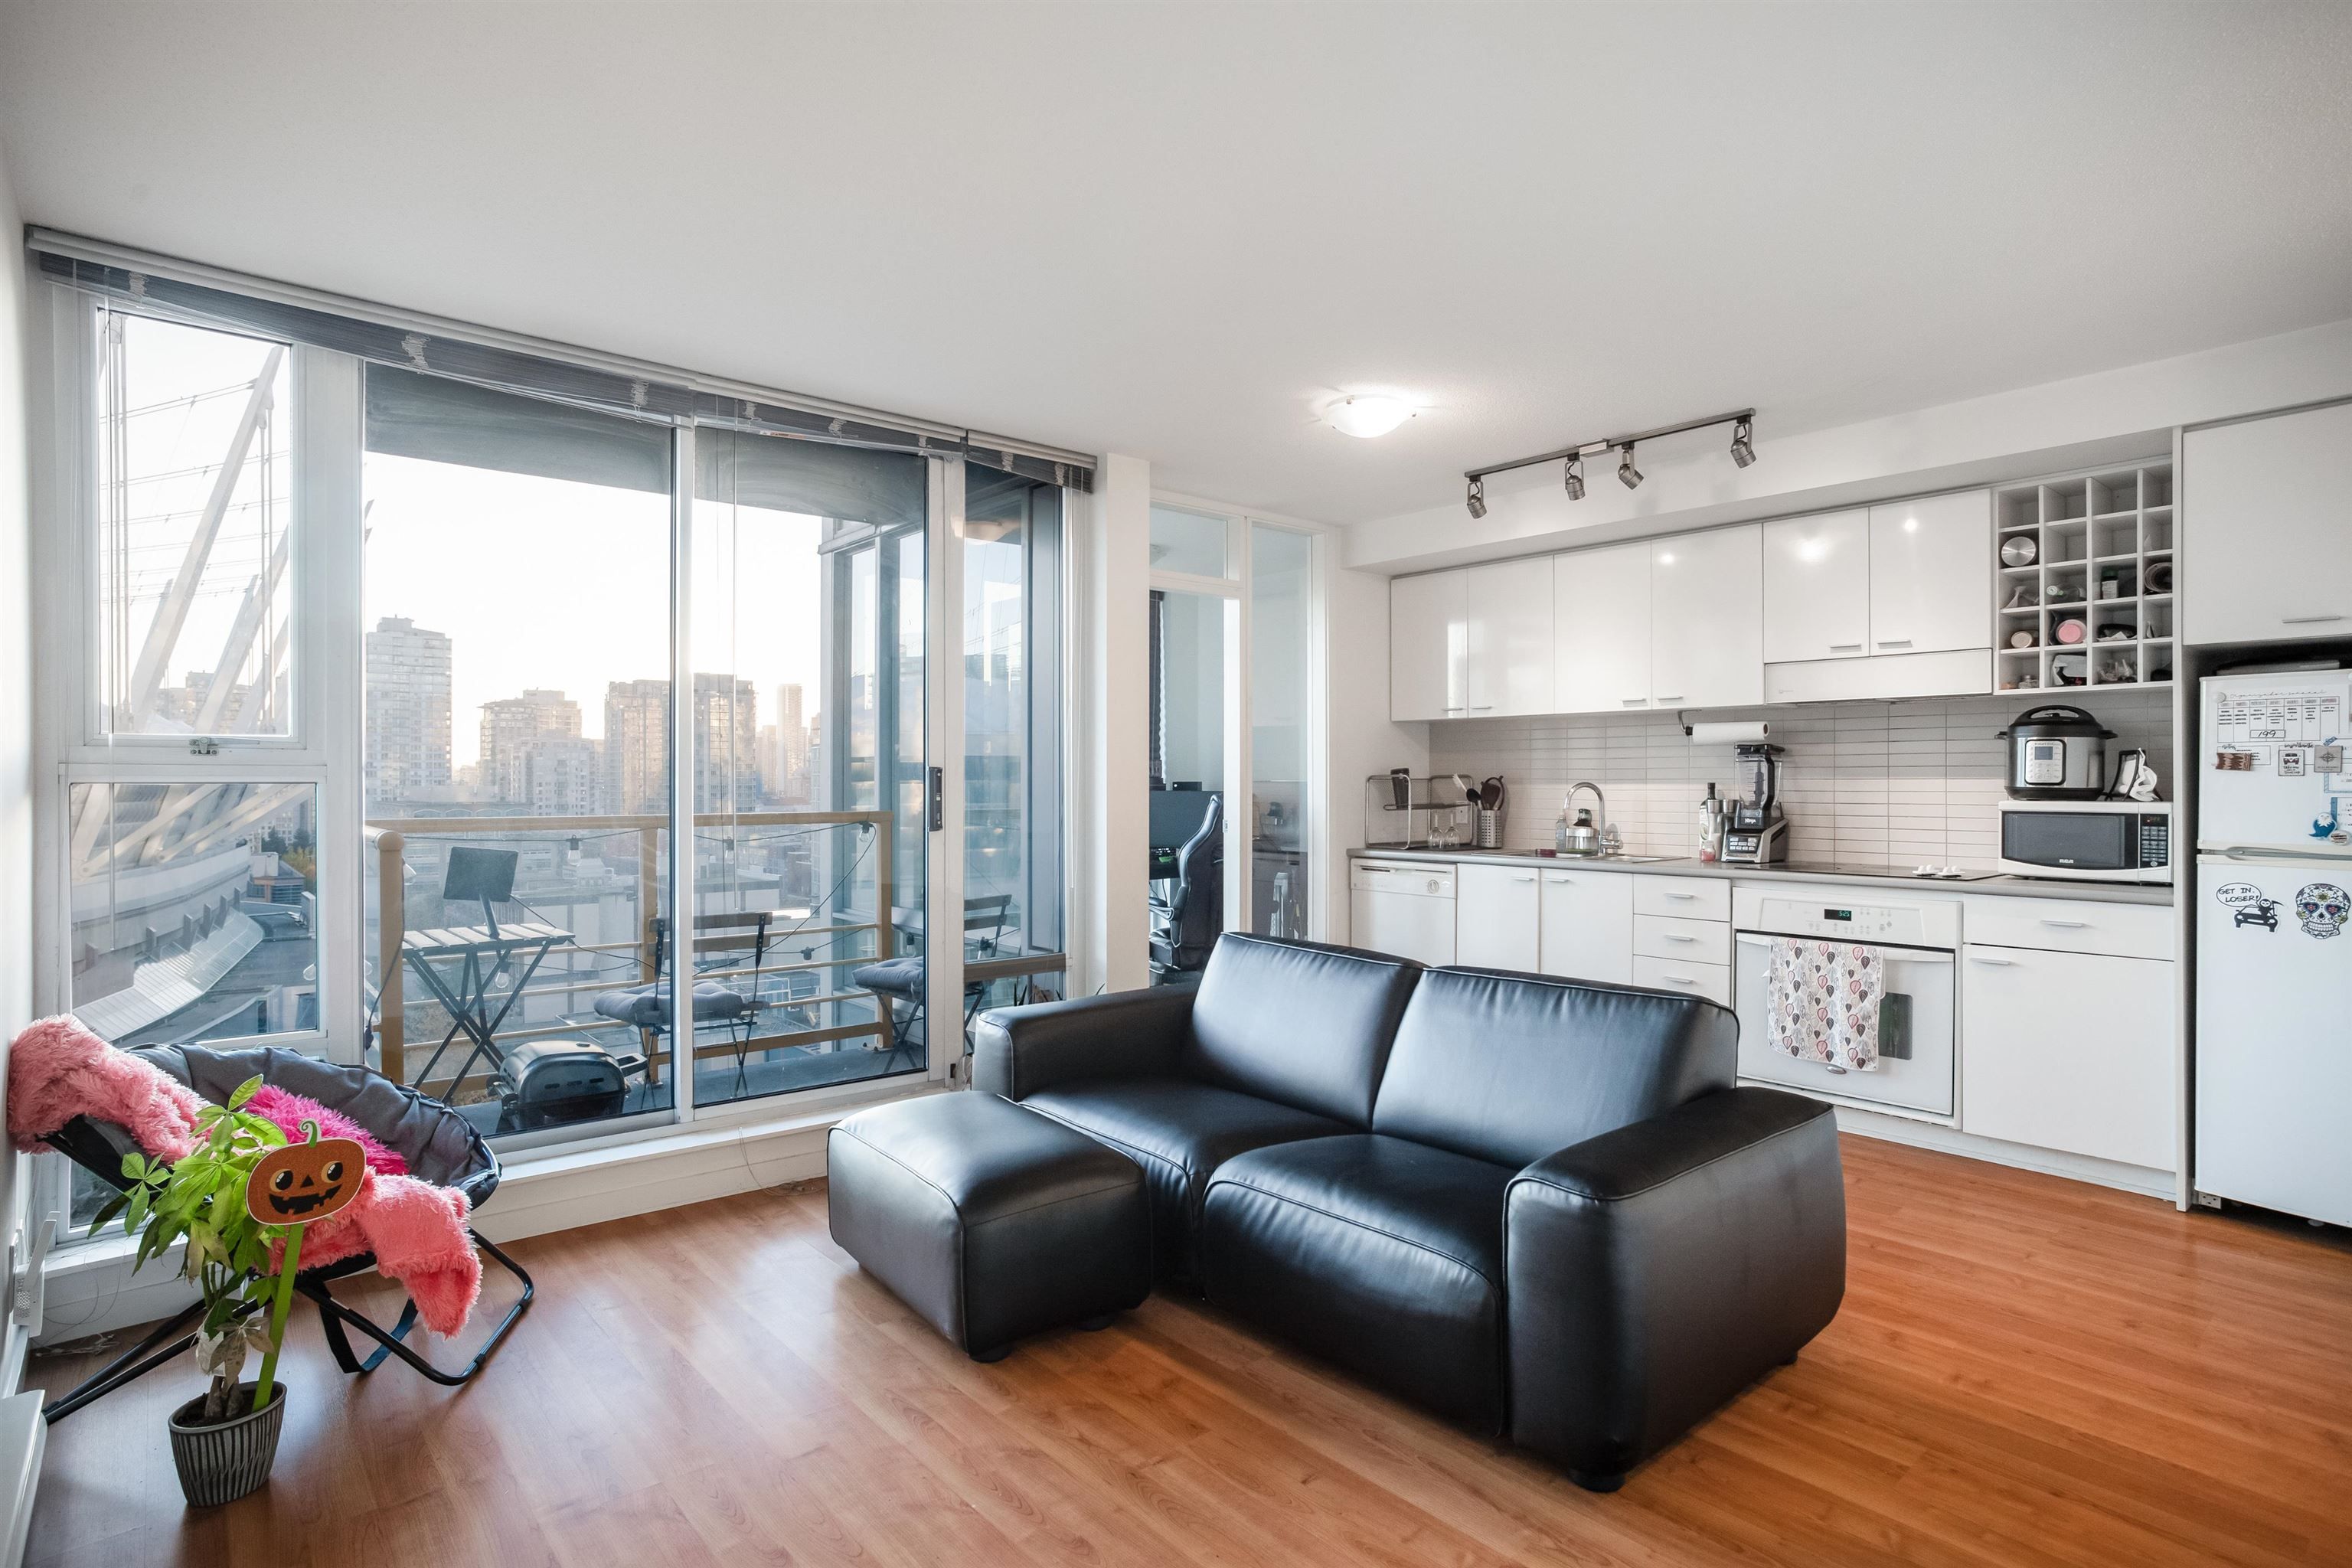 Main Photo: 1201 668 CITADEL PARADE in Vancouver: Downtown VW Condo for sale (Vancouver West)  : MLS®# R2630194